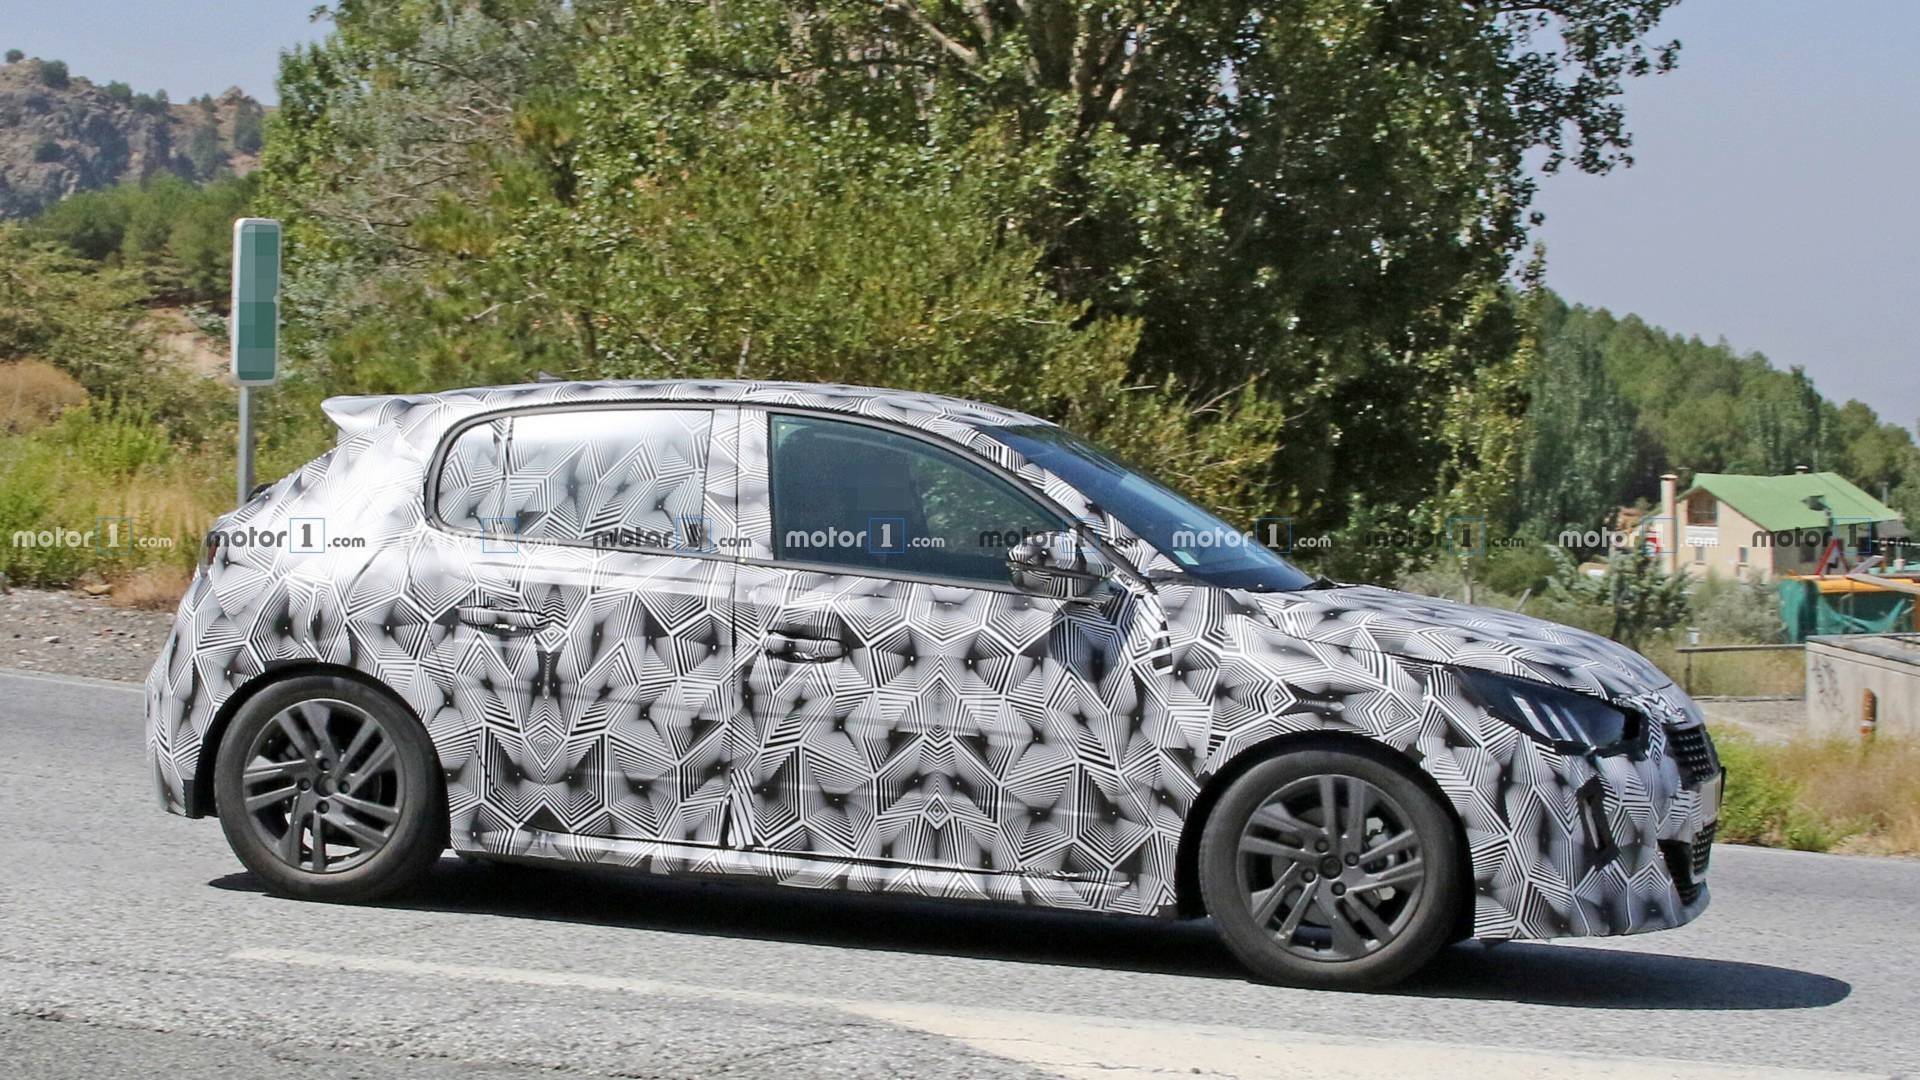 Peugeot Spied Looking Stylish With Full Production Body